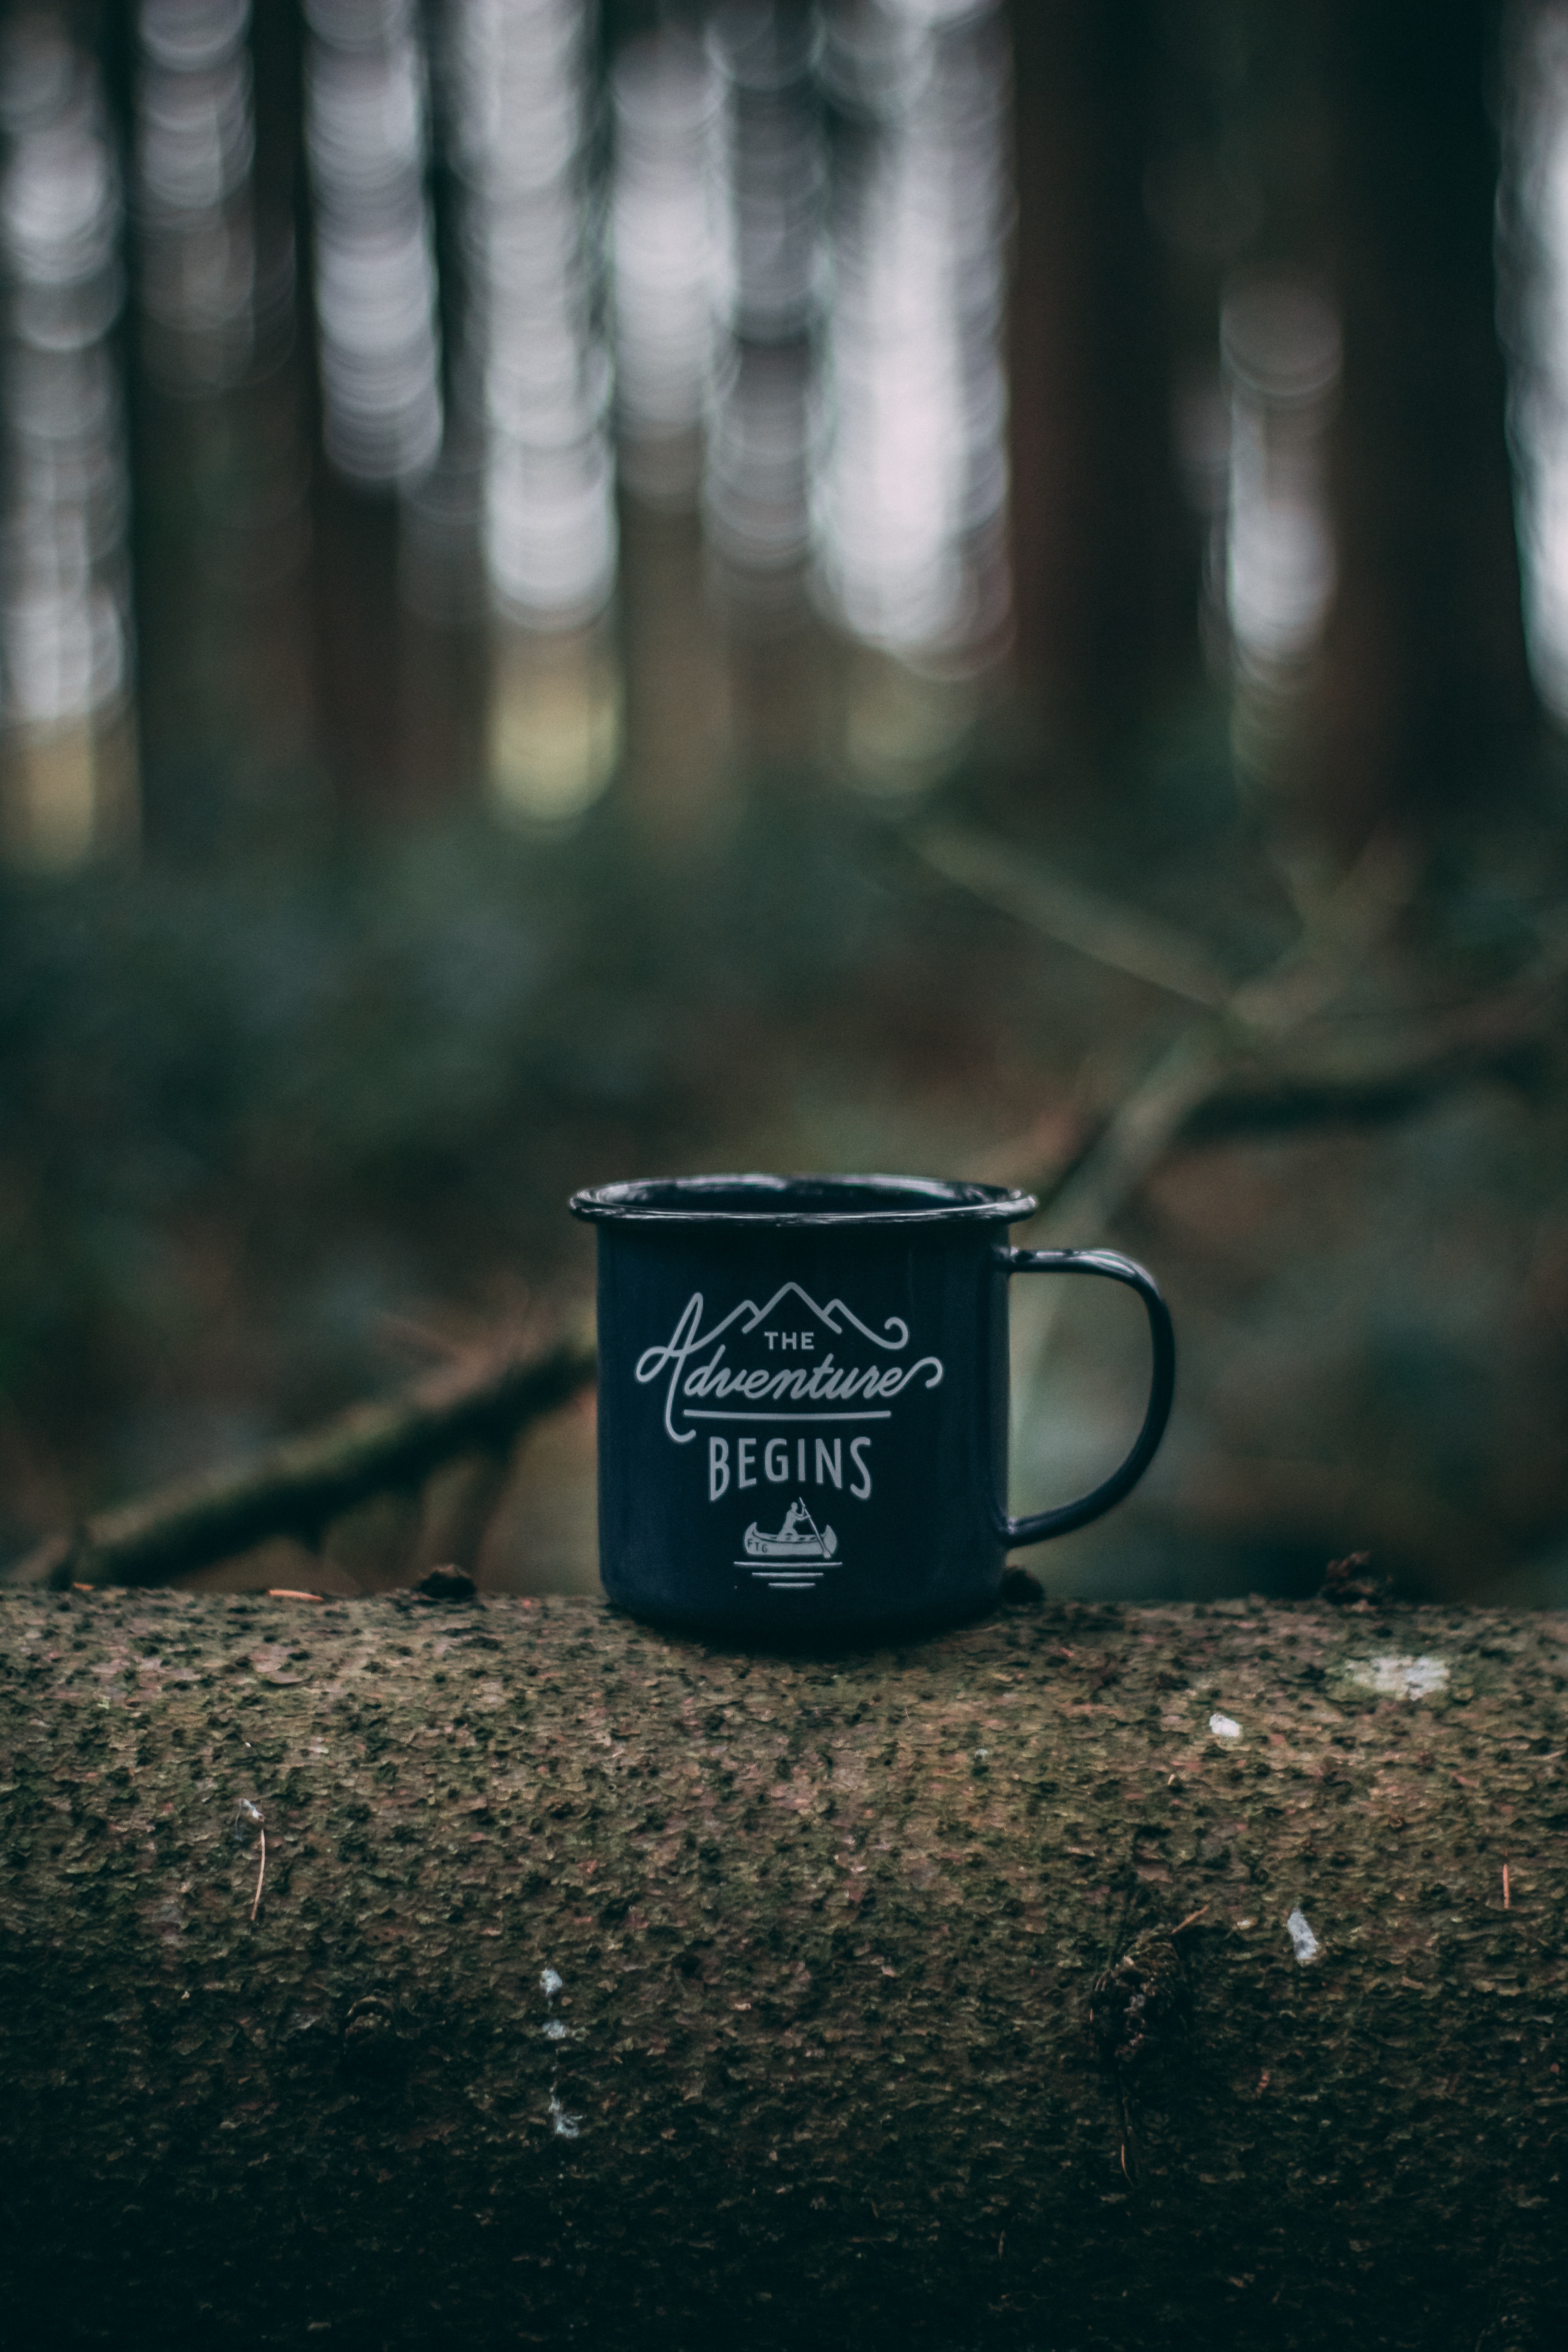 camping, words, journey, cup, campsite, mug UHD